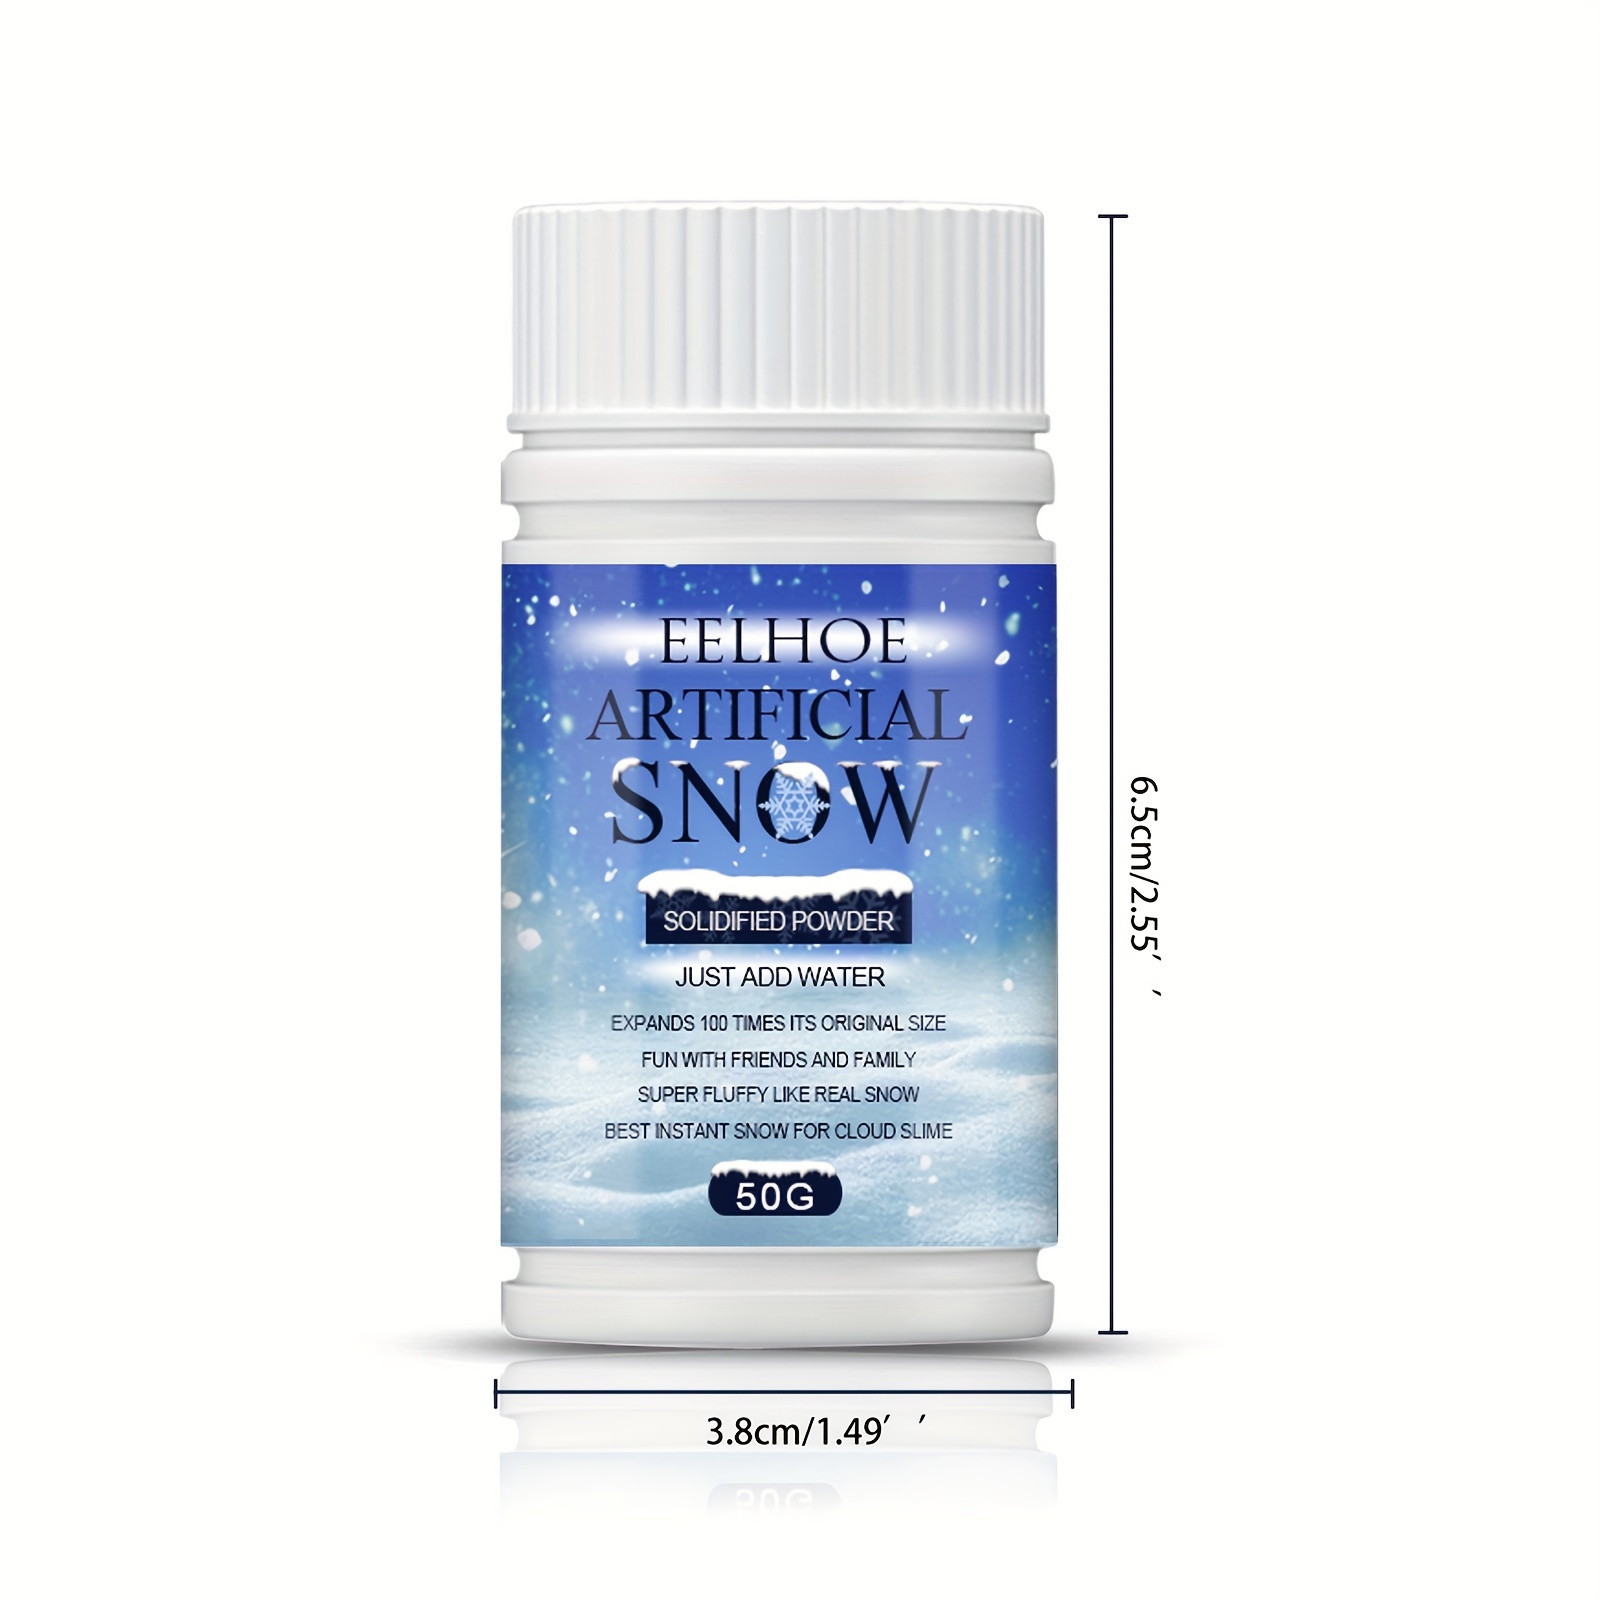 Let it Snow Instant Fake Snow Powder -White for sale online